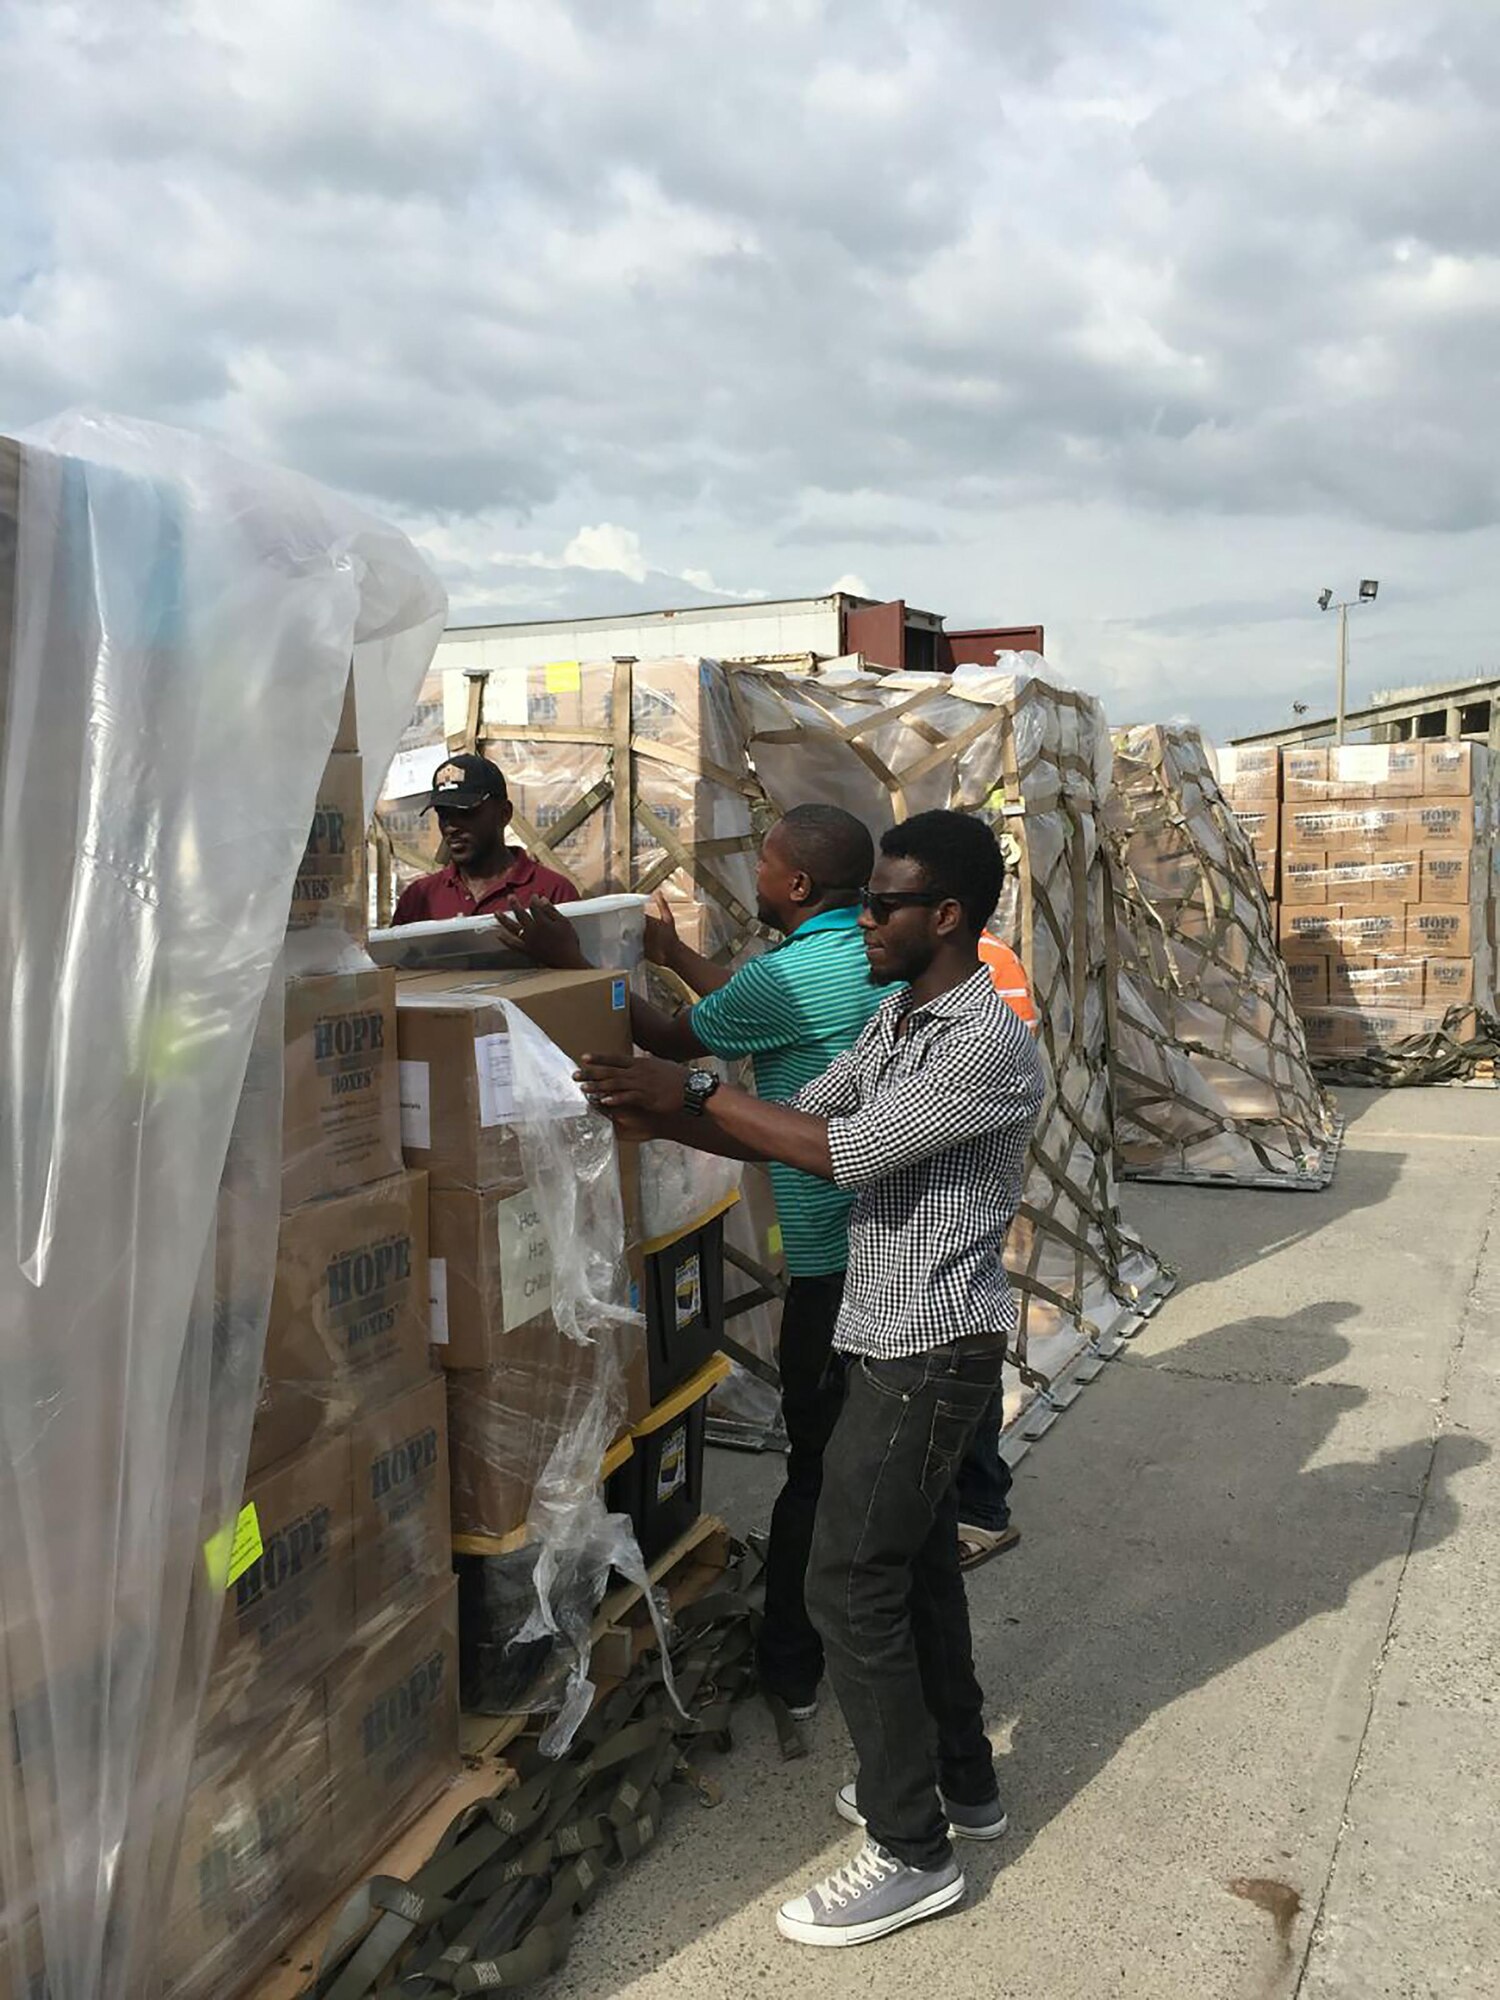 Pallets consisting of more than 100,000 pounds worth of rice and beans are unwrapped and being prepared to load onto trucks to be delivered to those in need in Haiti.